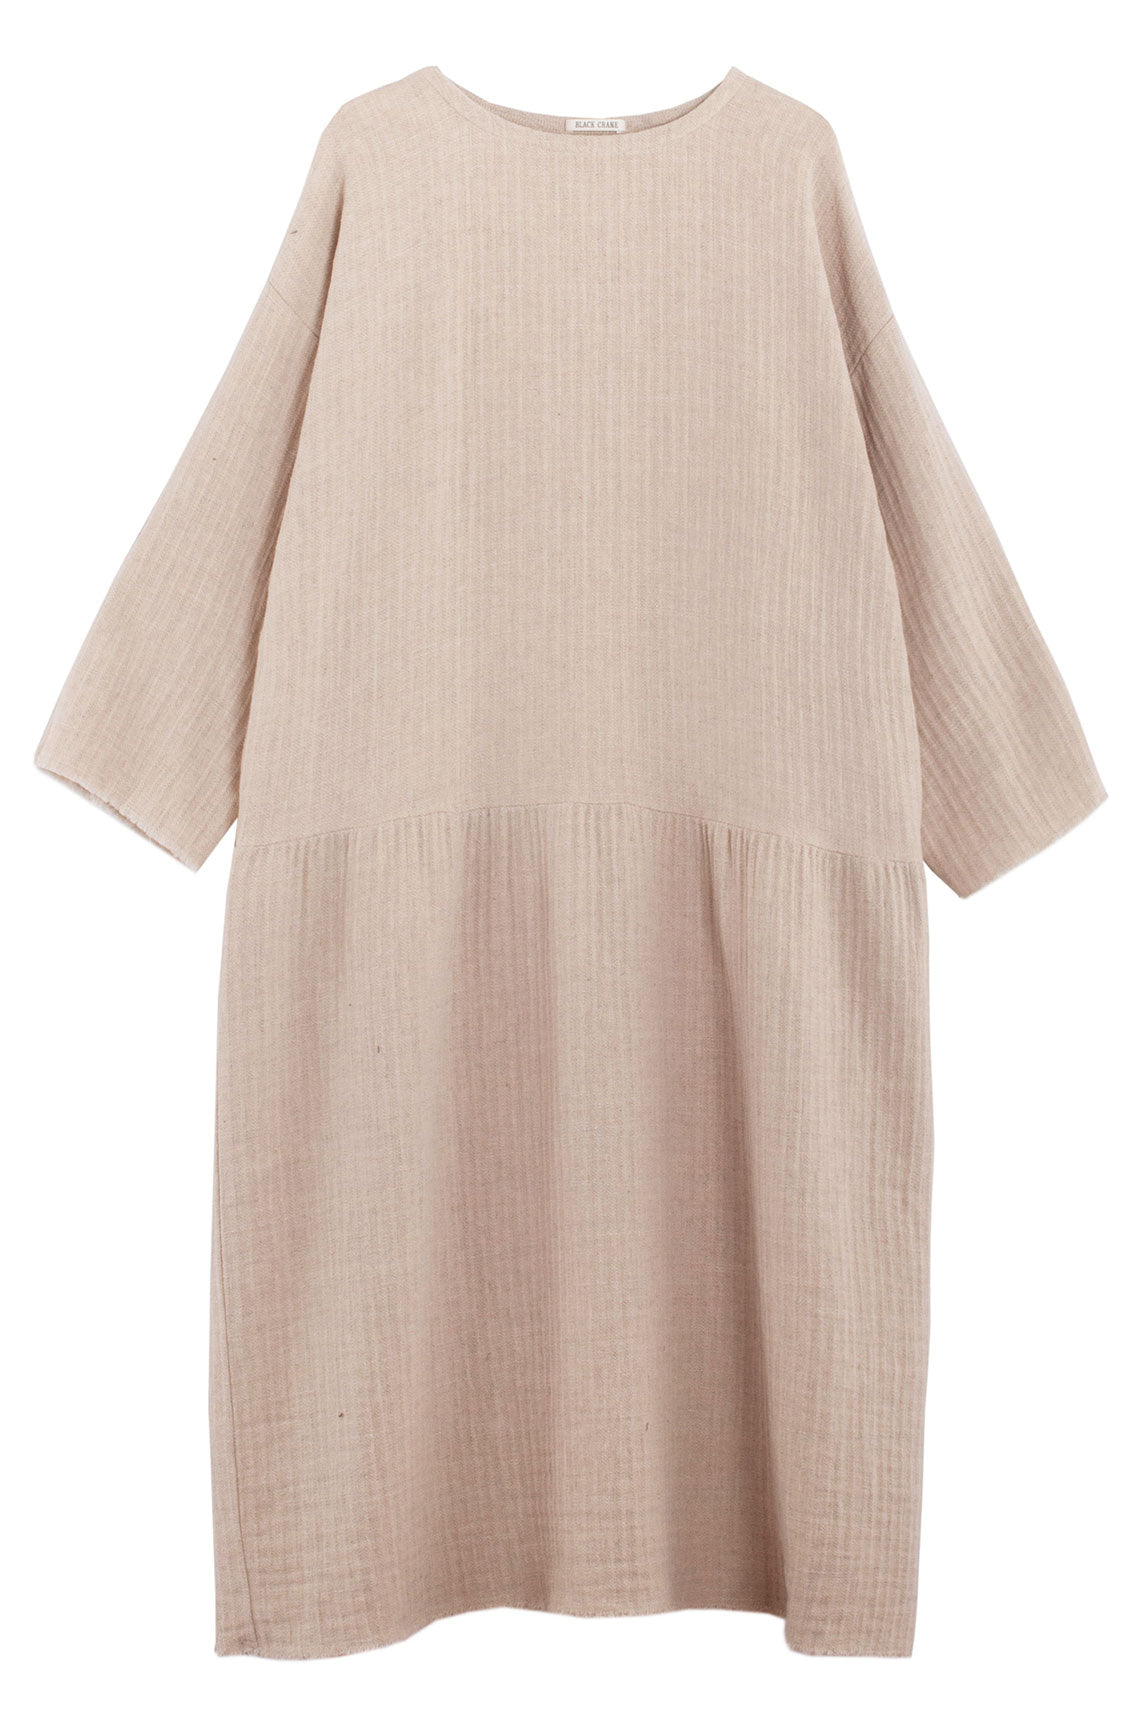 Natural Texture Easy Dress